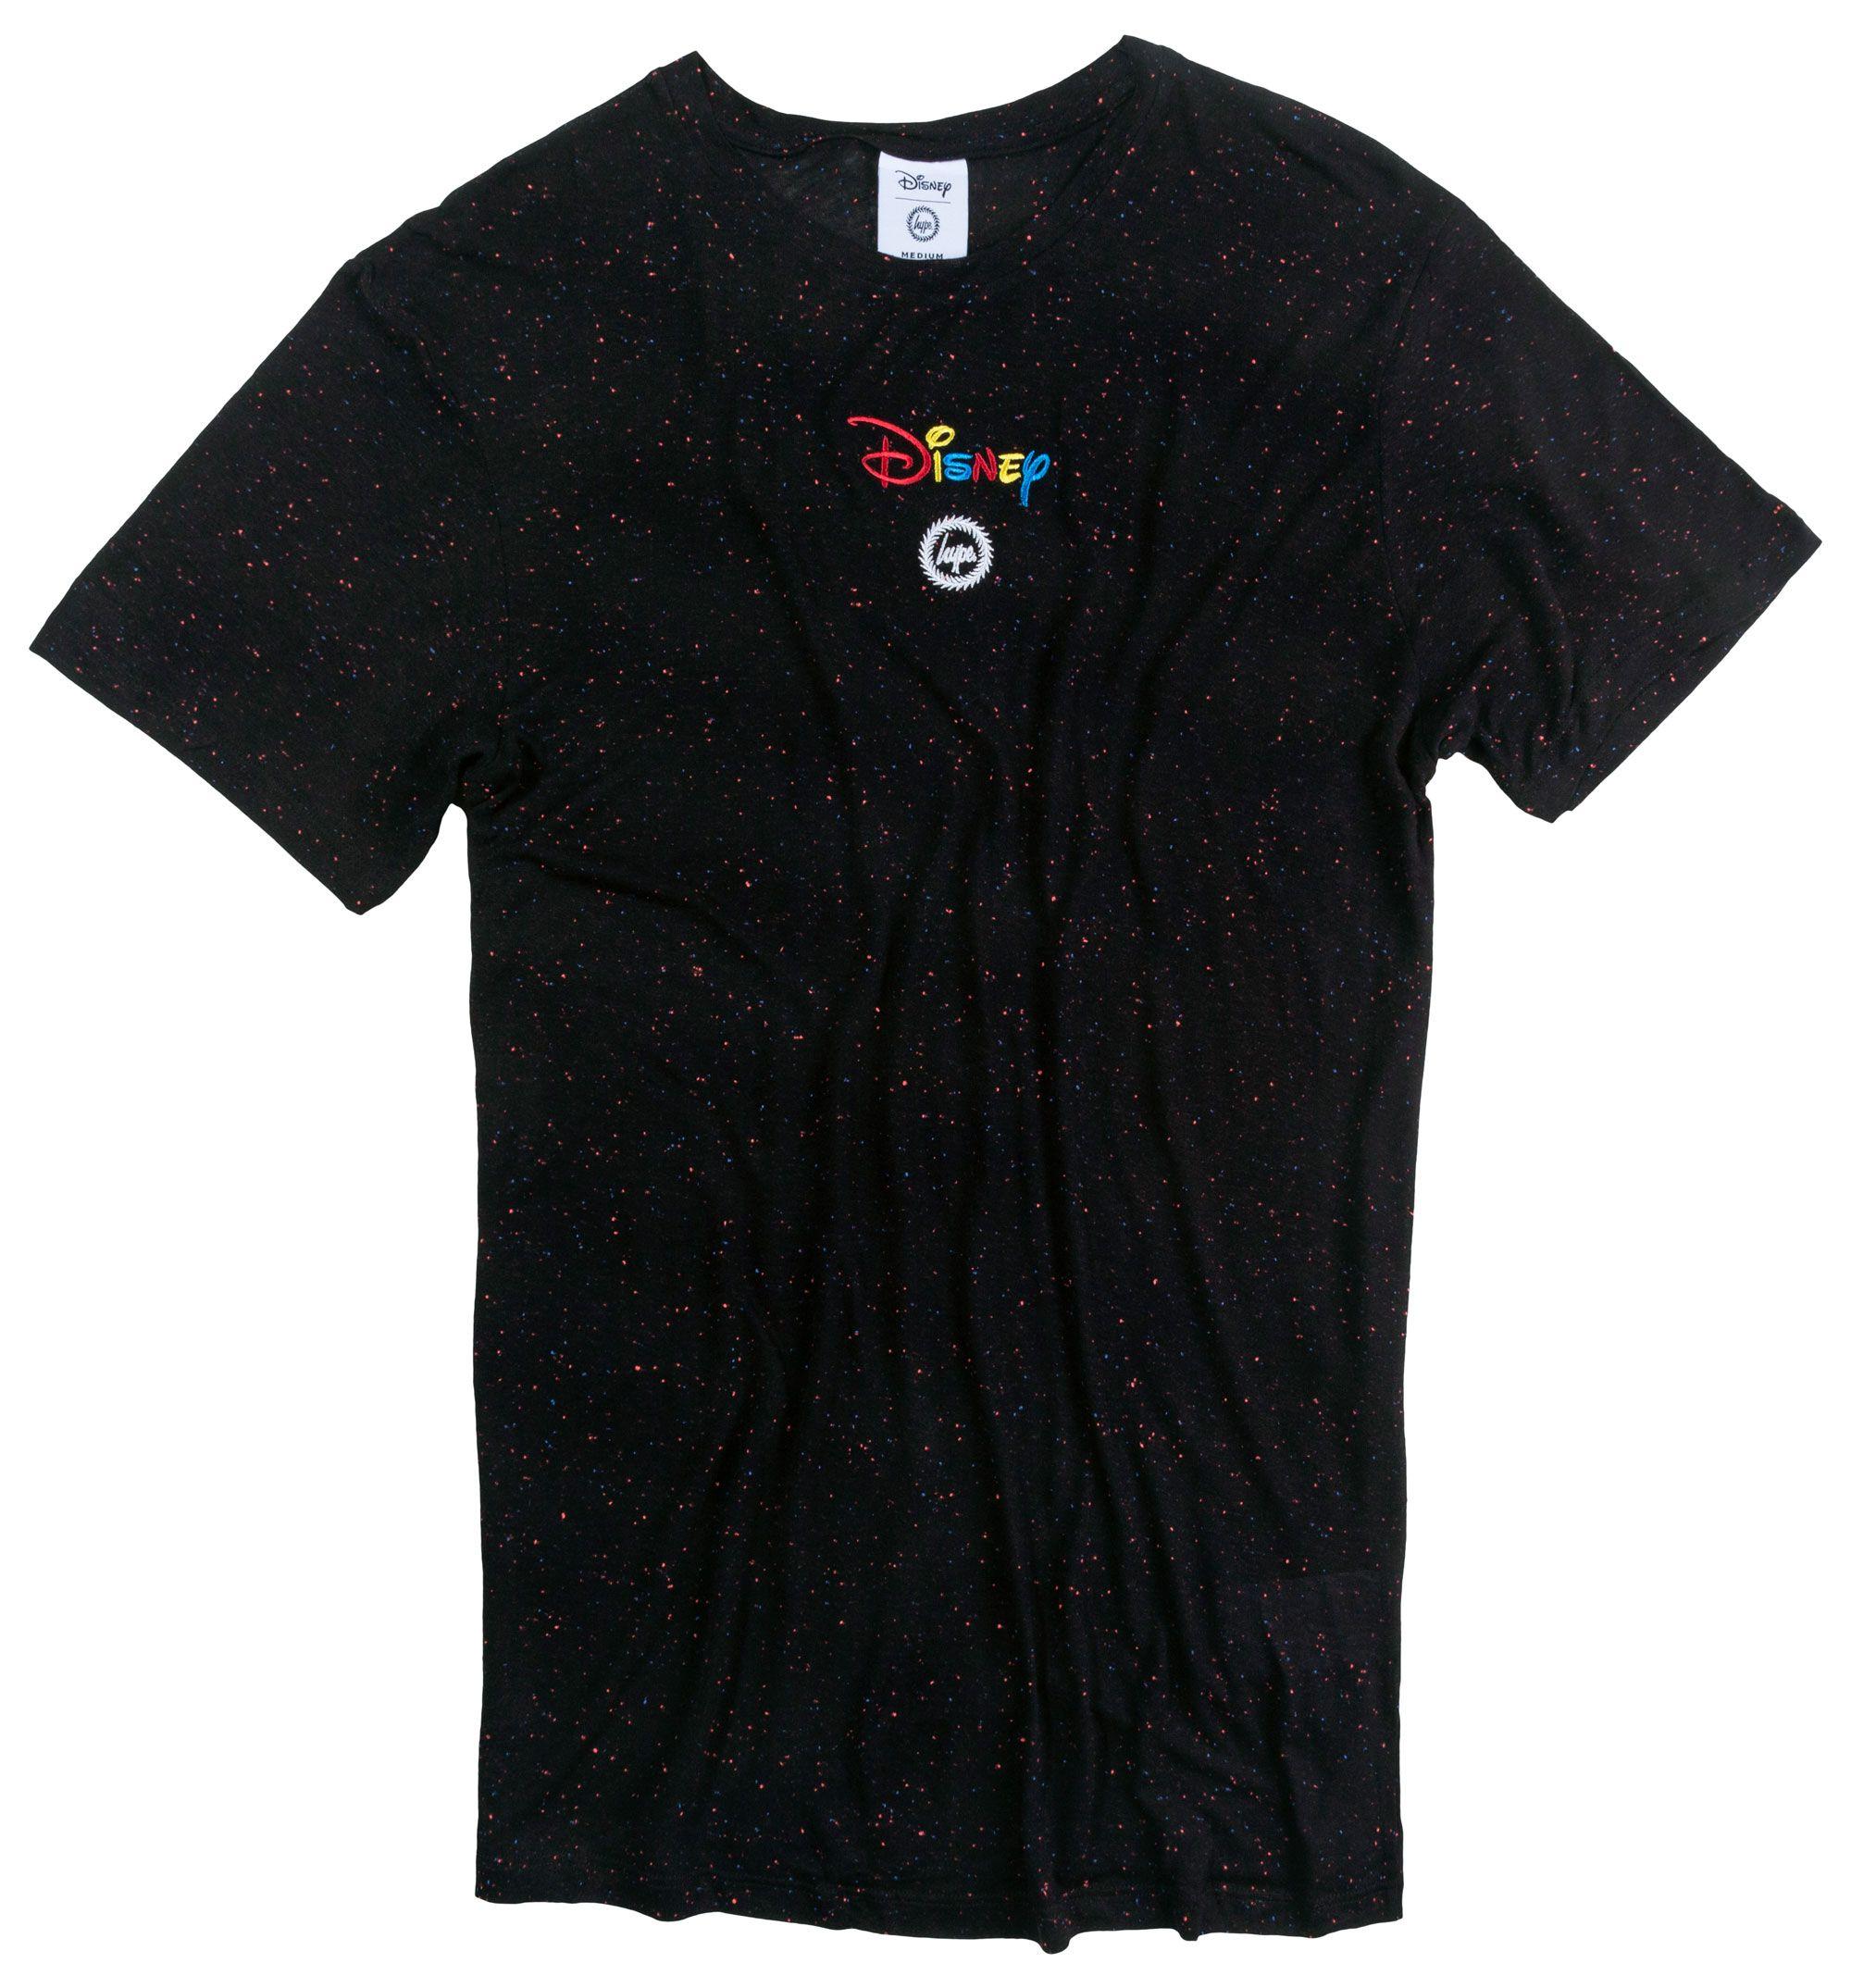 Red and Black Disney Logo - Men's Black Disney Embroidered Logo Textured T-Shirt from Hype